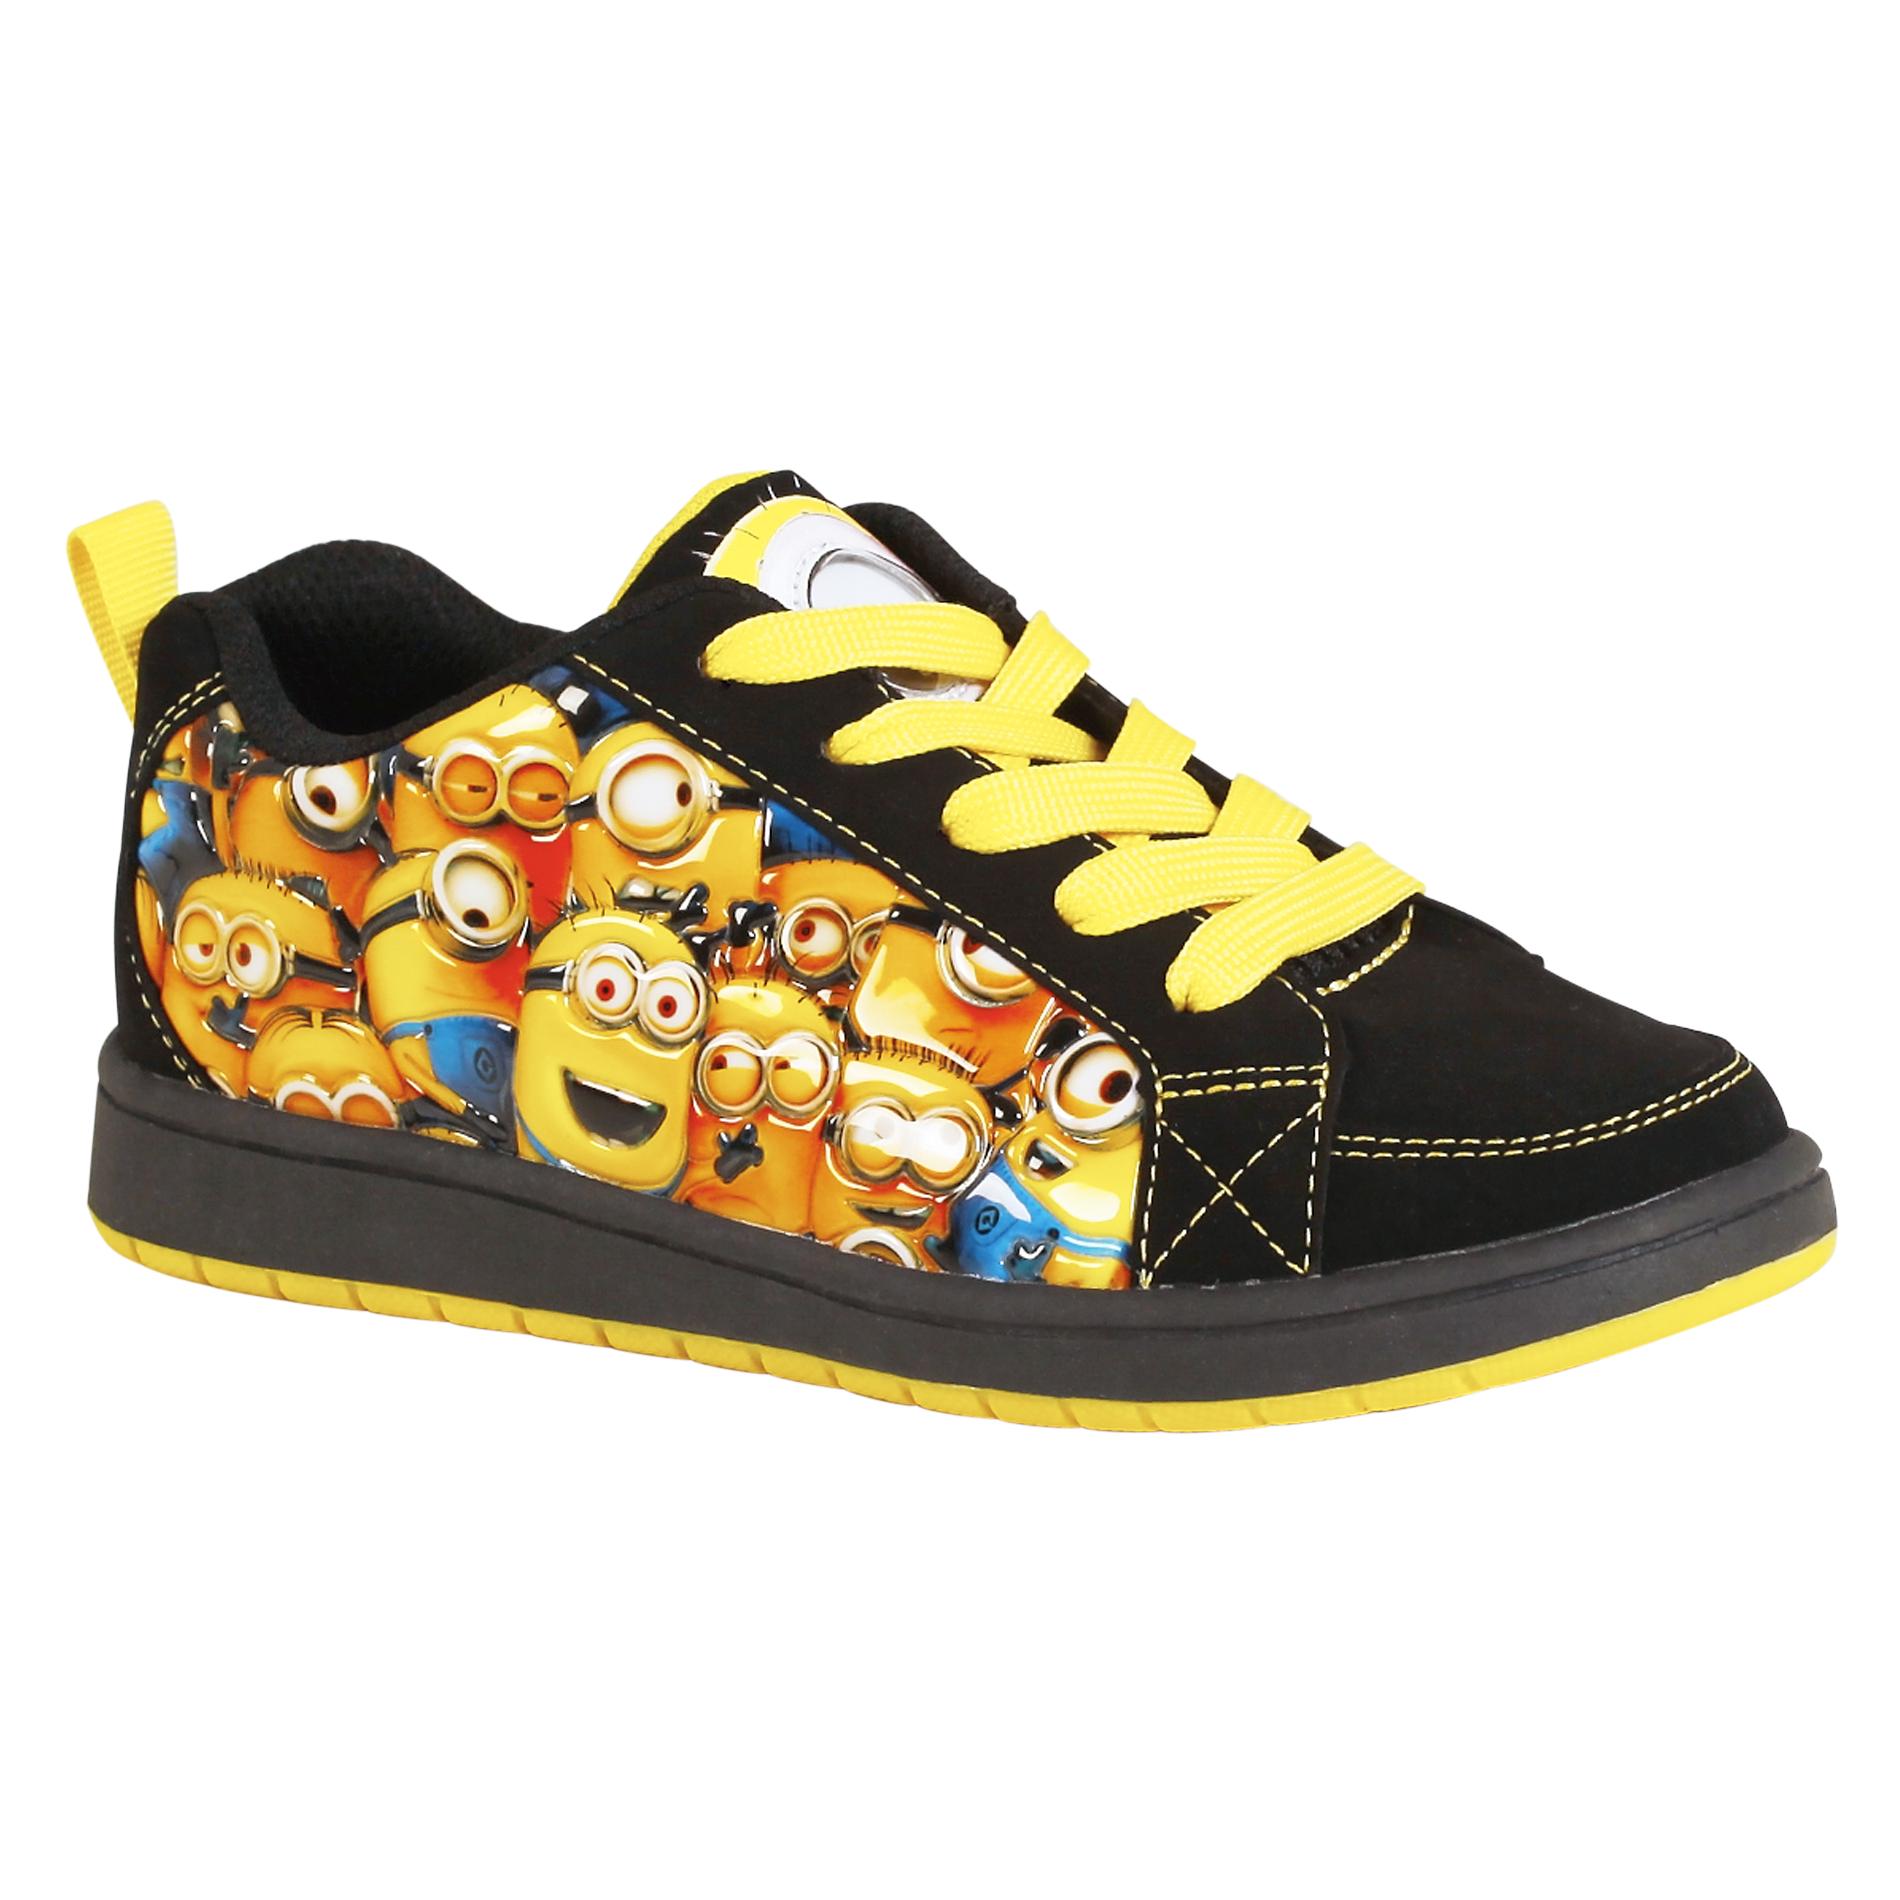 Character Boy's Sneaker Despicable Me - Black/Yellow